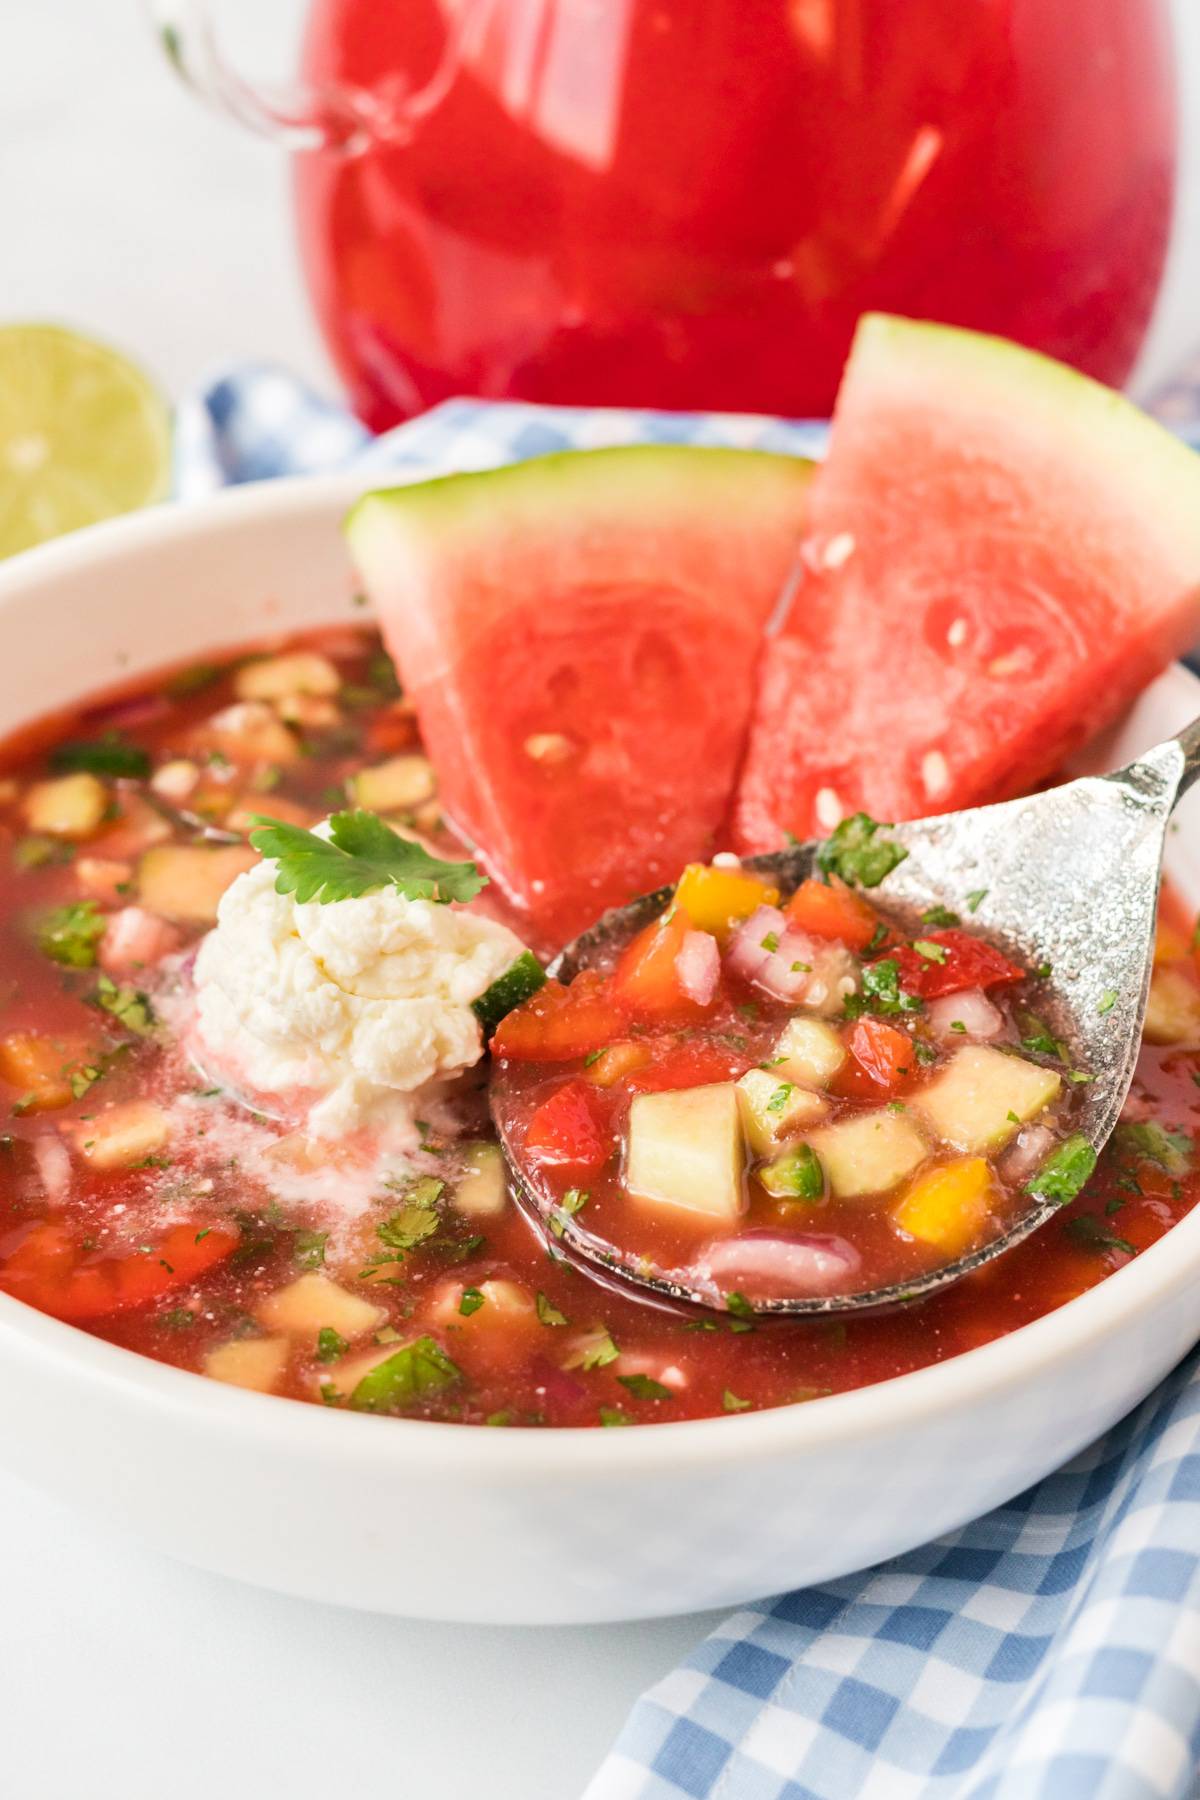 Watermelon gazpacho in a white bowl with a silver spoon and two watermelon wedges.